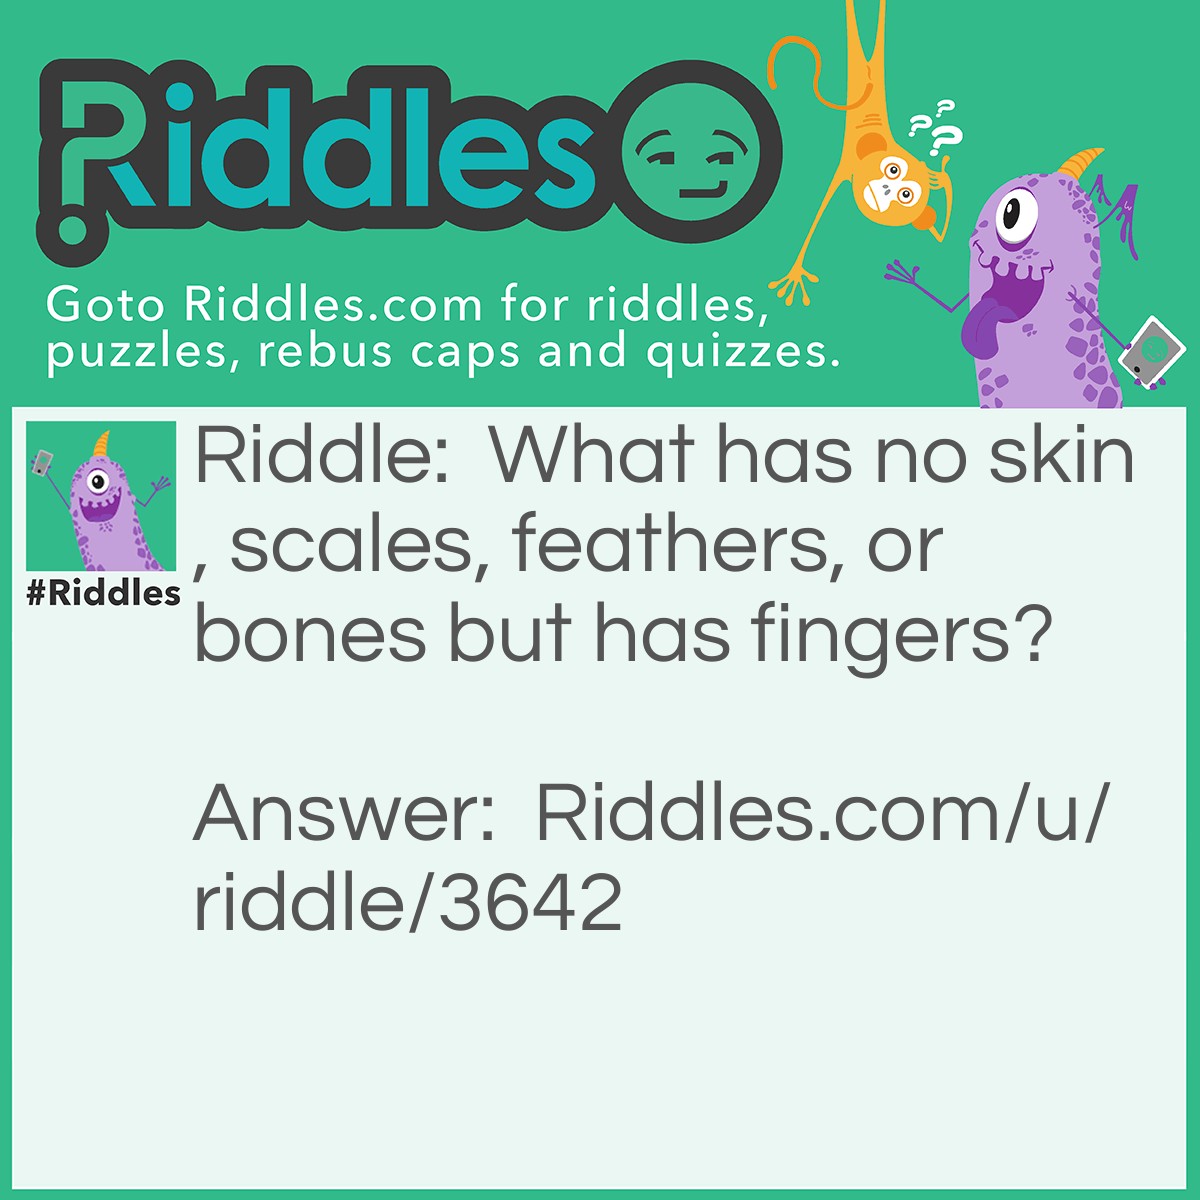 Riddle: What has no skin, scales, feathers, or bones but has fingers? Answer: Gloves.